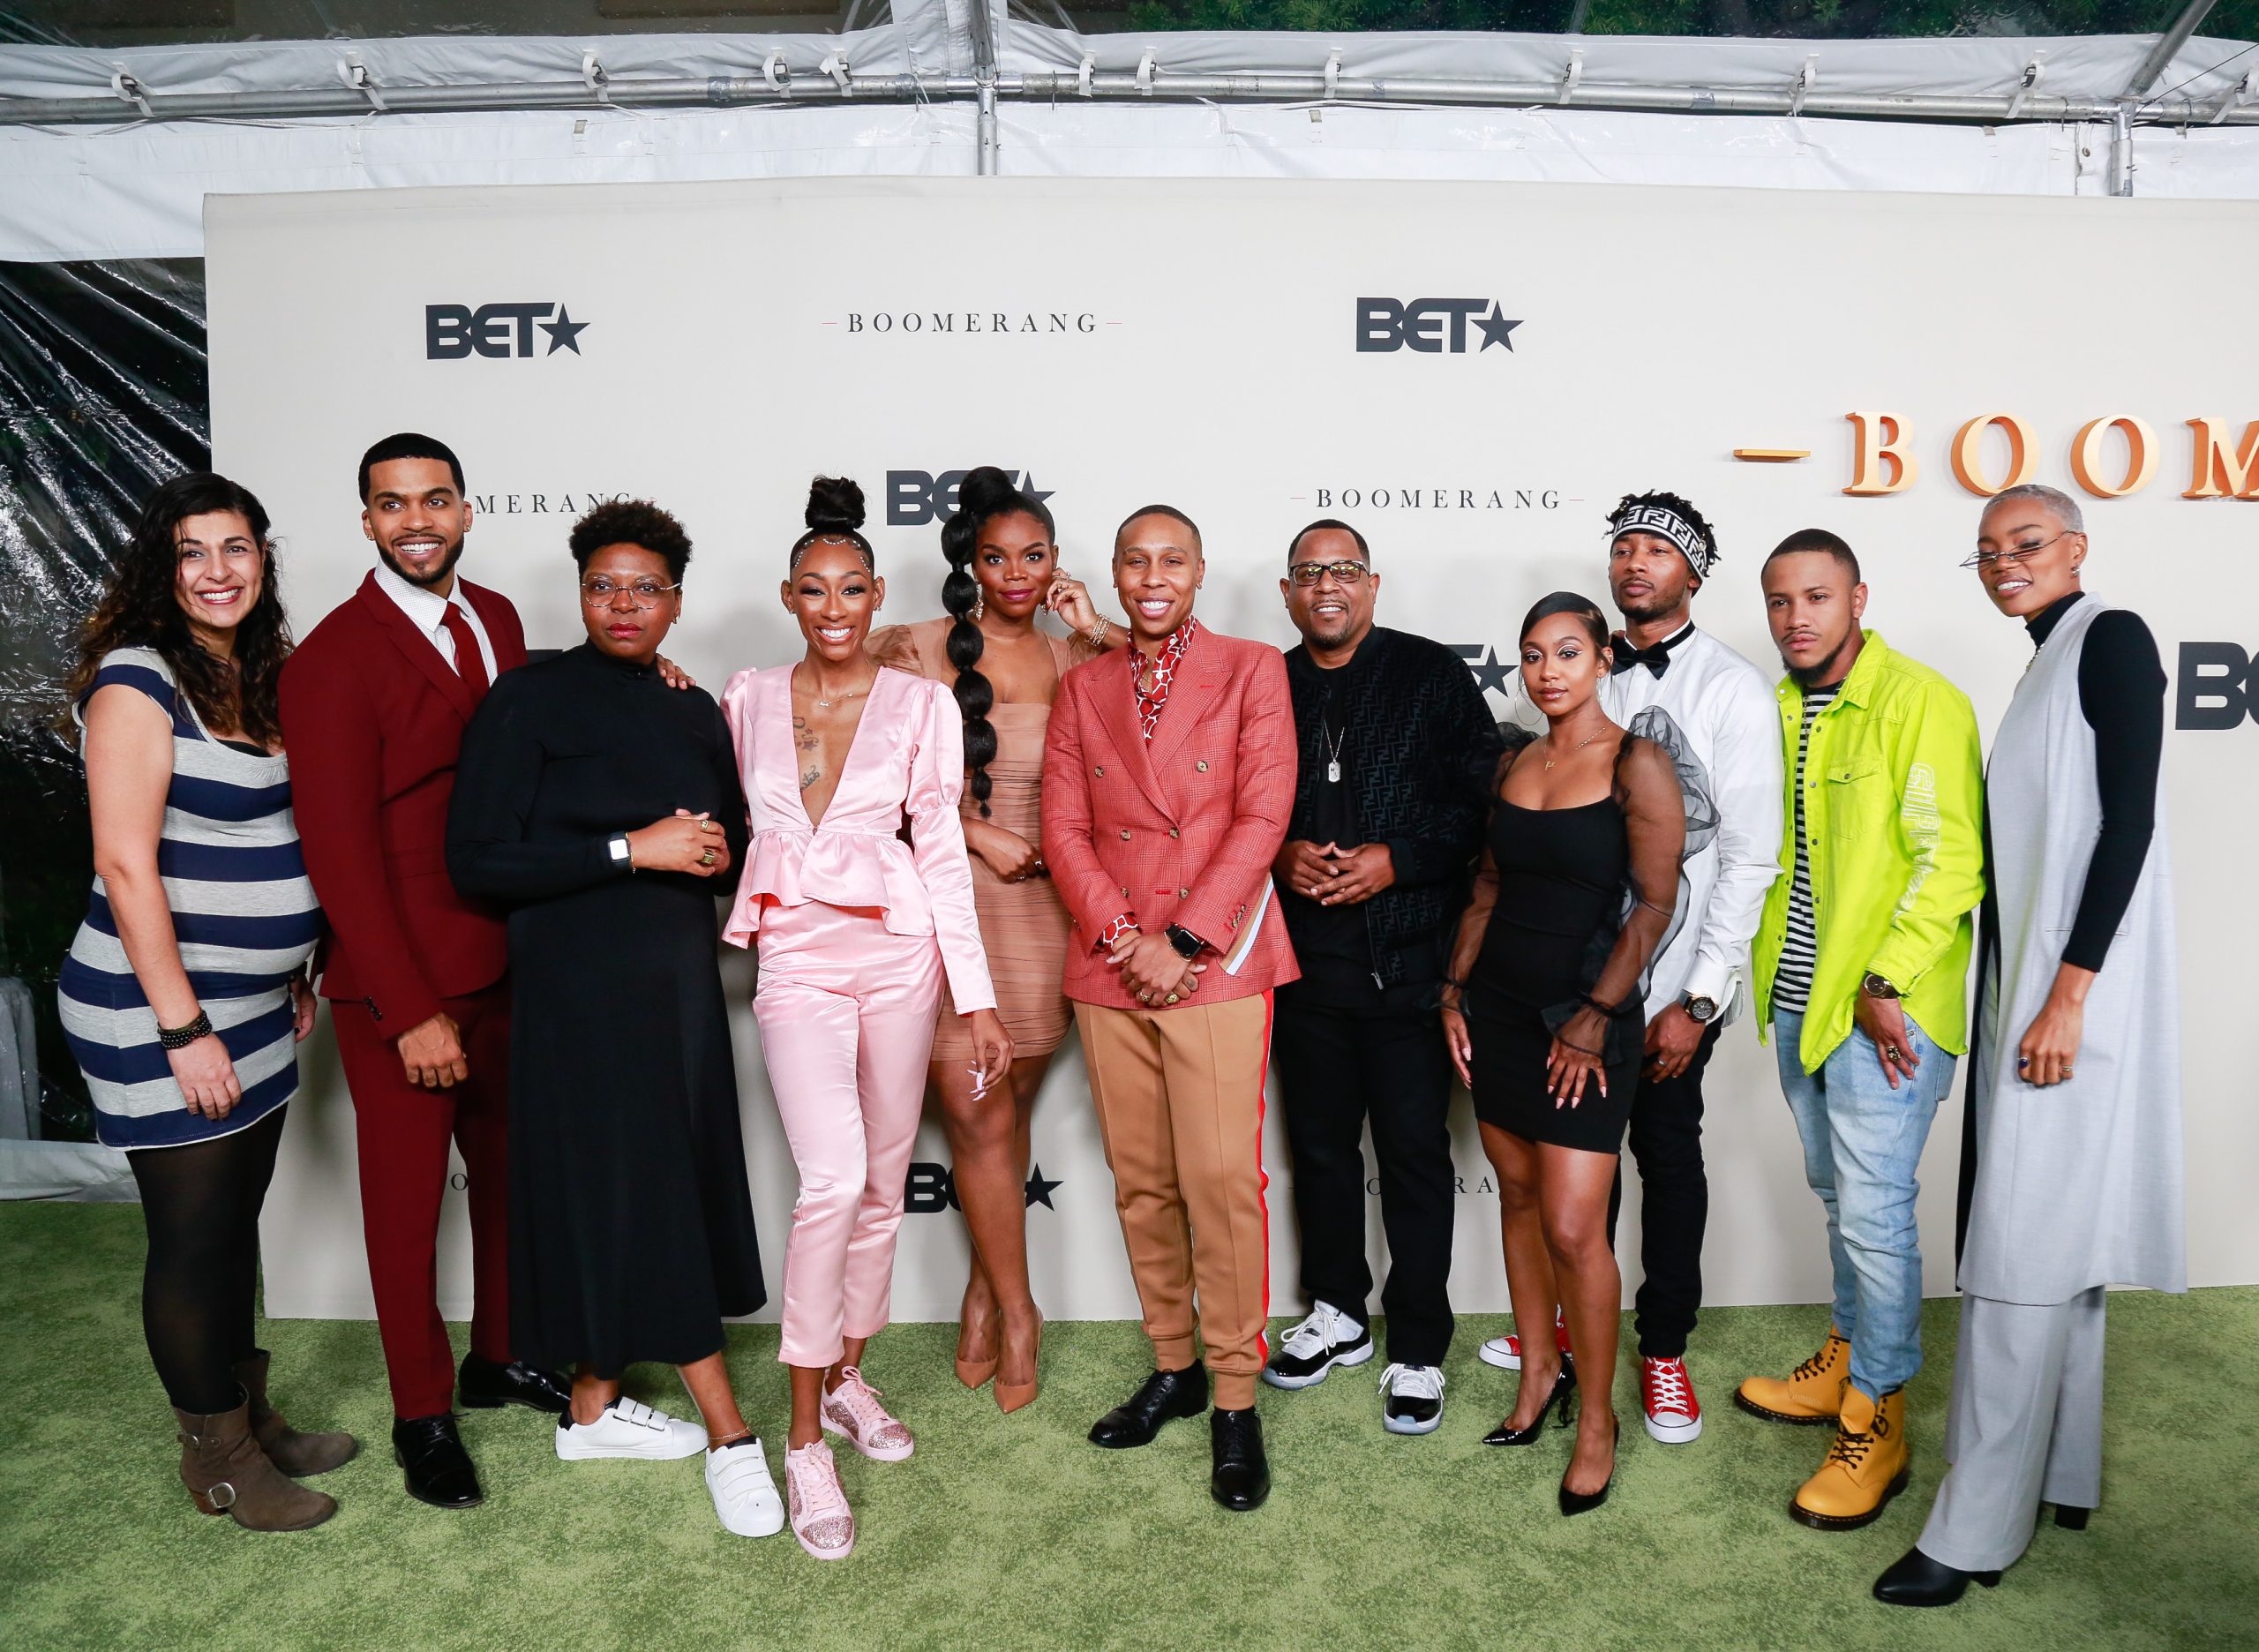 PICS: Lena Waithe, Martin Lawrence,  Lance Gross & More Attend “BOOMERANG” on BET S2 Premiere